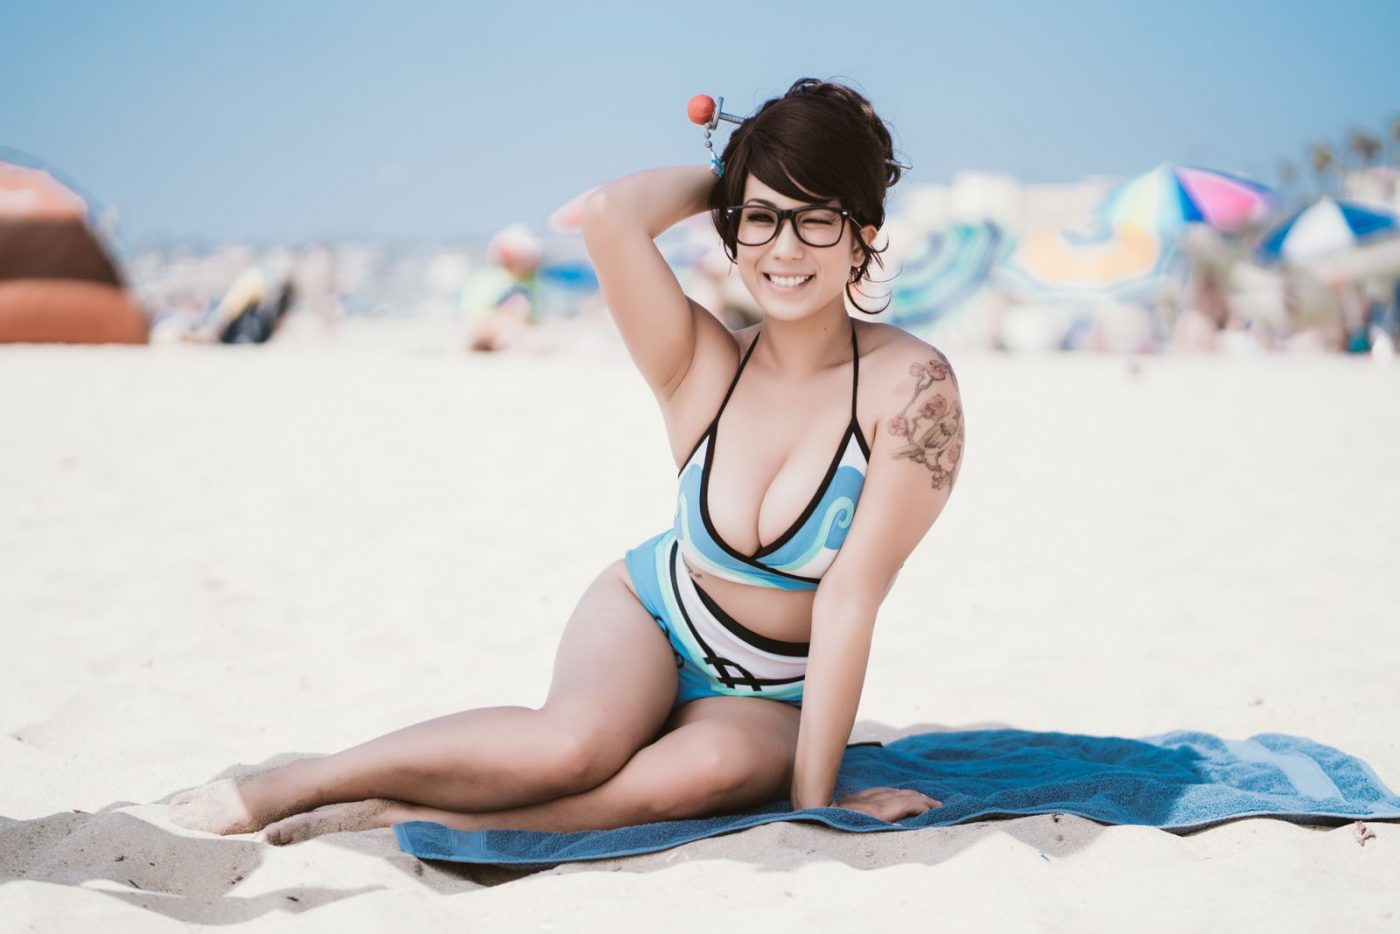 Overwatch: Pool party Mei cosplay by Rian Synnth